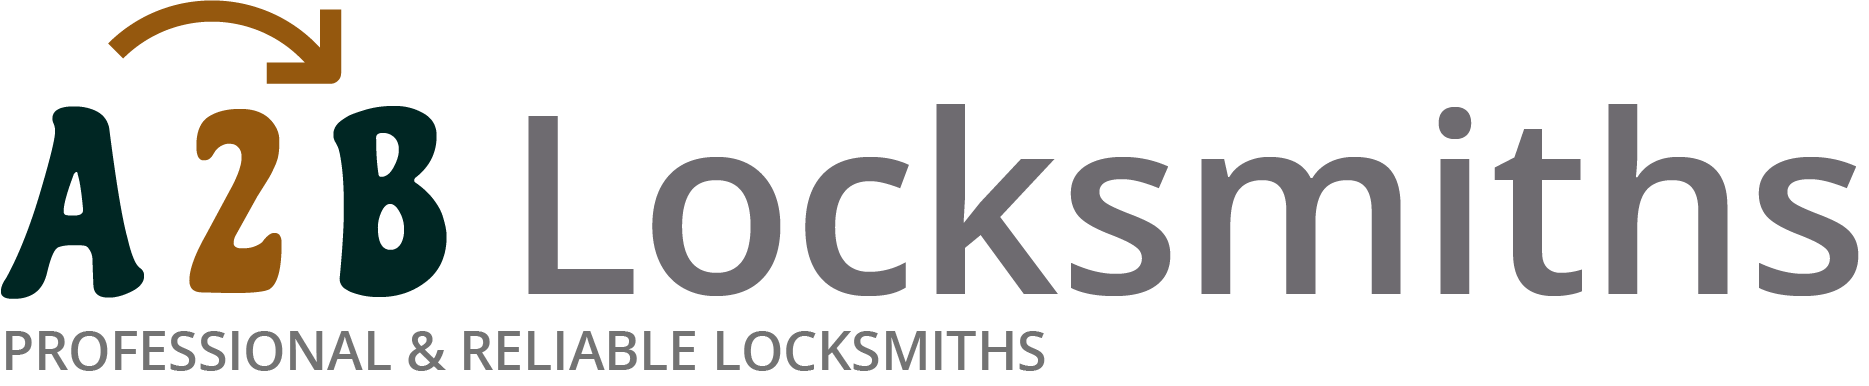 If you are locked out of house in Stocksbridge, our 24/7 local emergency locksmith services can help you.